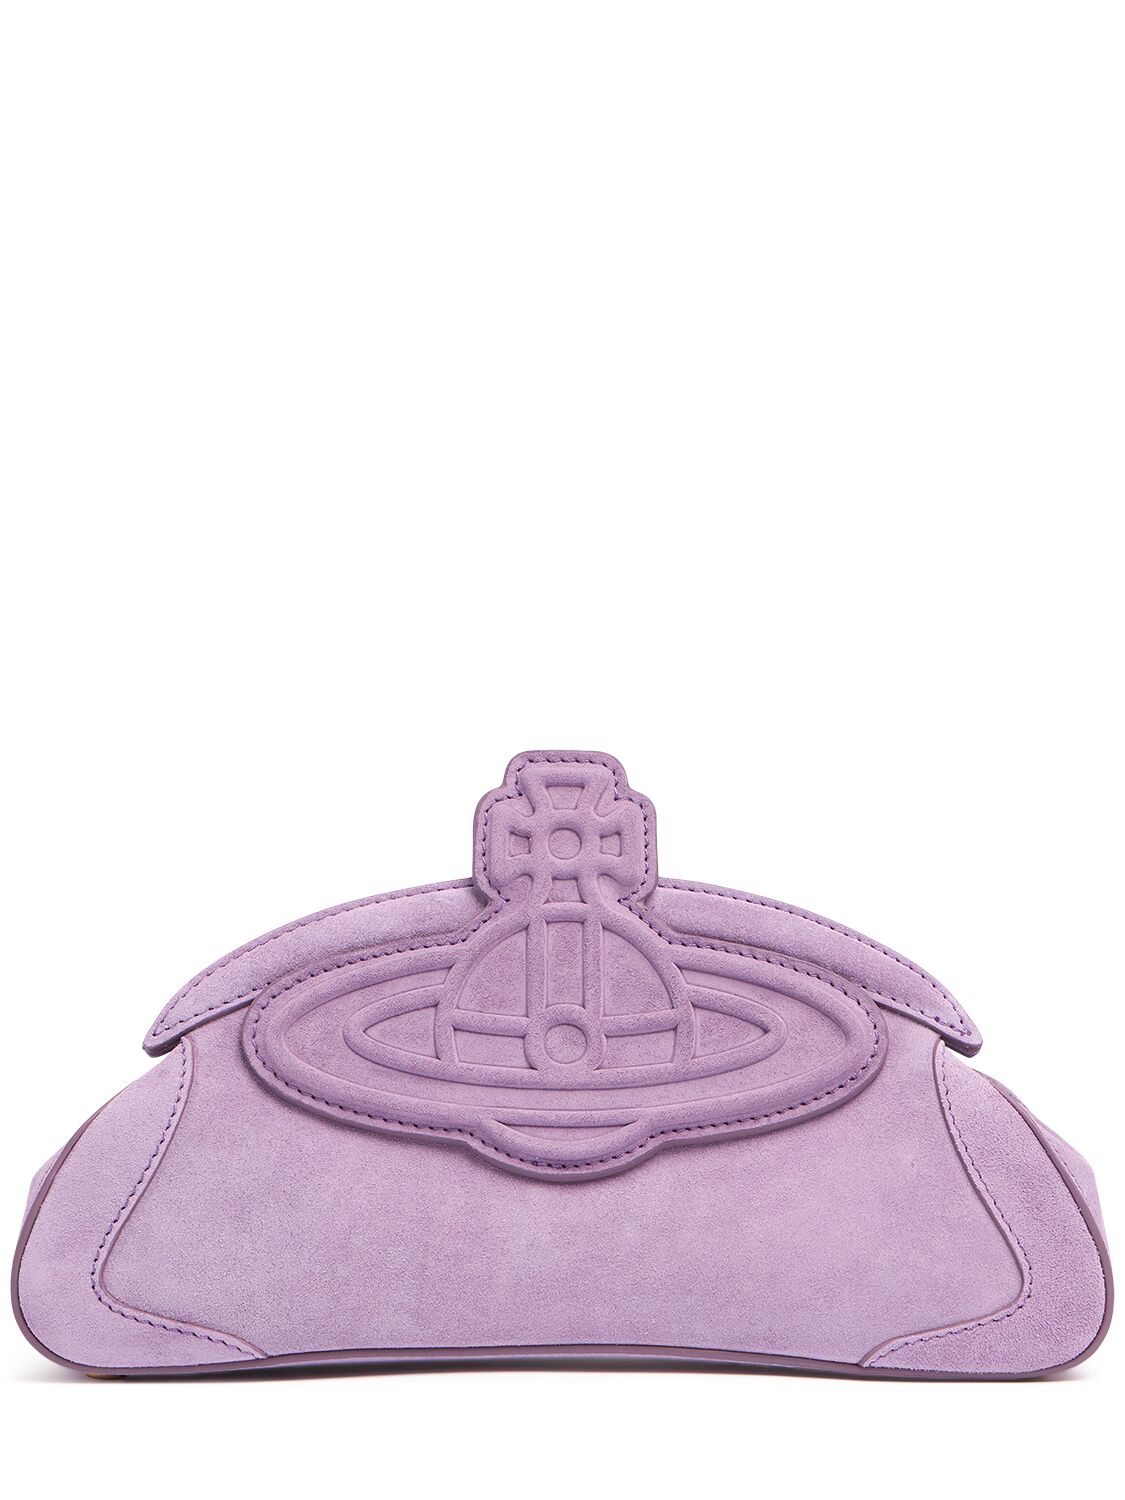 Vivienne Westwood Amber Suede Clutch In Lilac